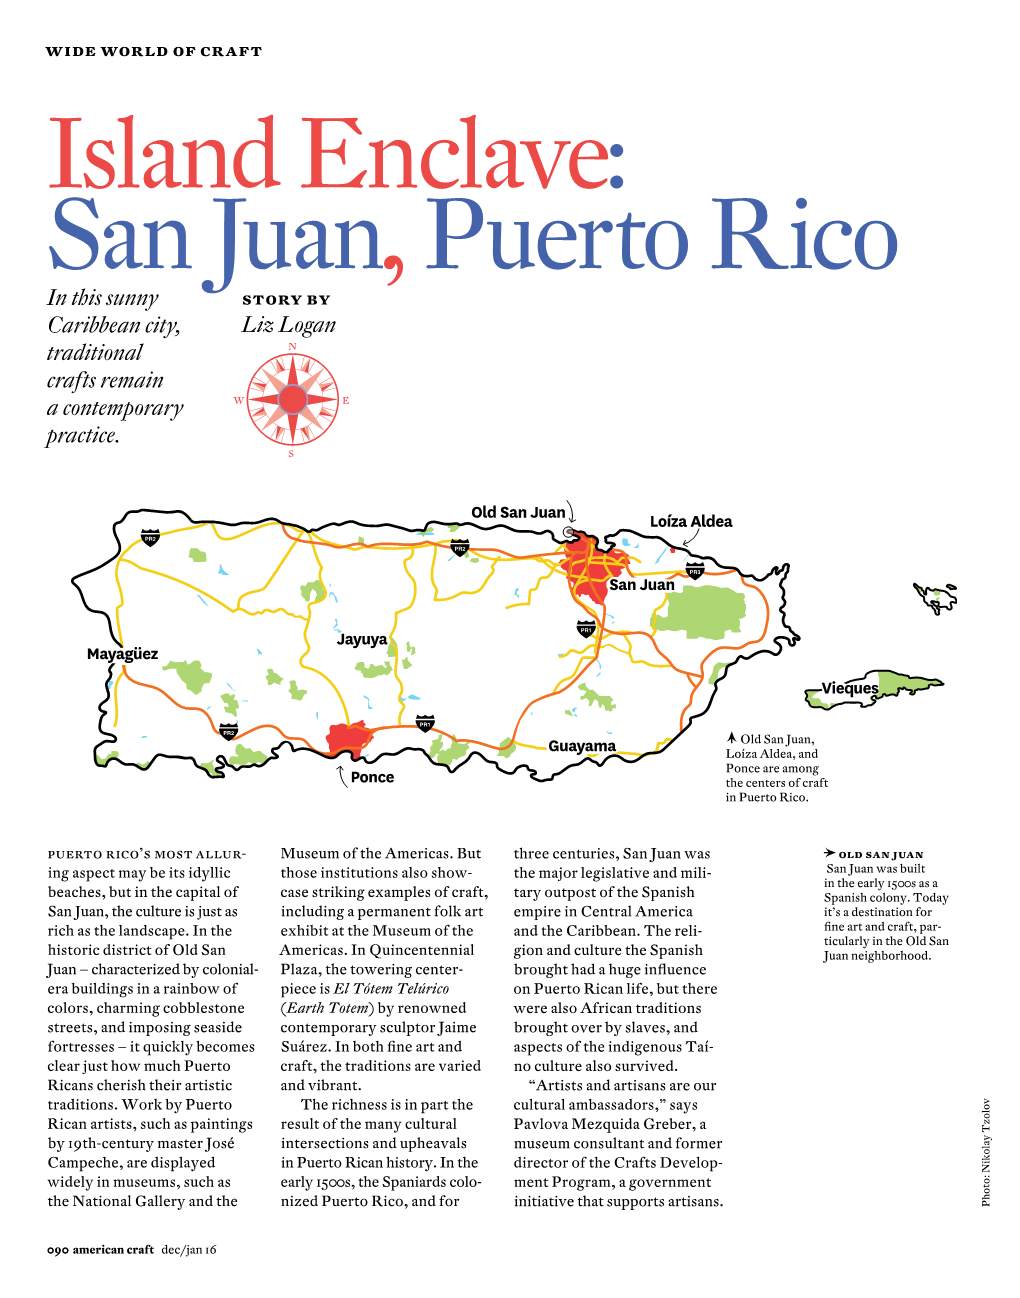 Island Enclave: San Juan, Puerto Rico in This Sunny Story by Caribbean City, Liz Logan Traditional Crafts Remain a Contemporary Practice